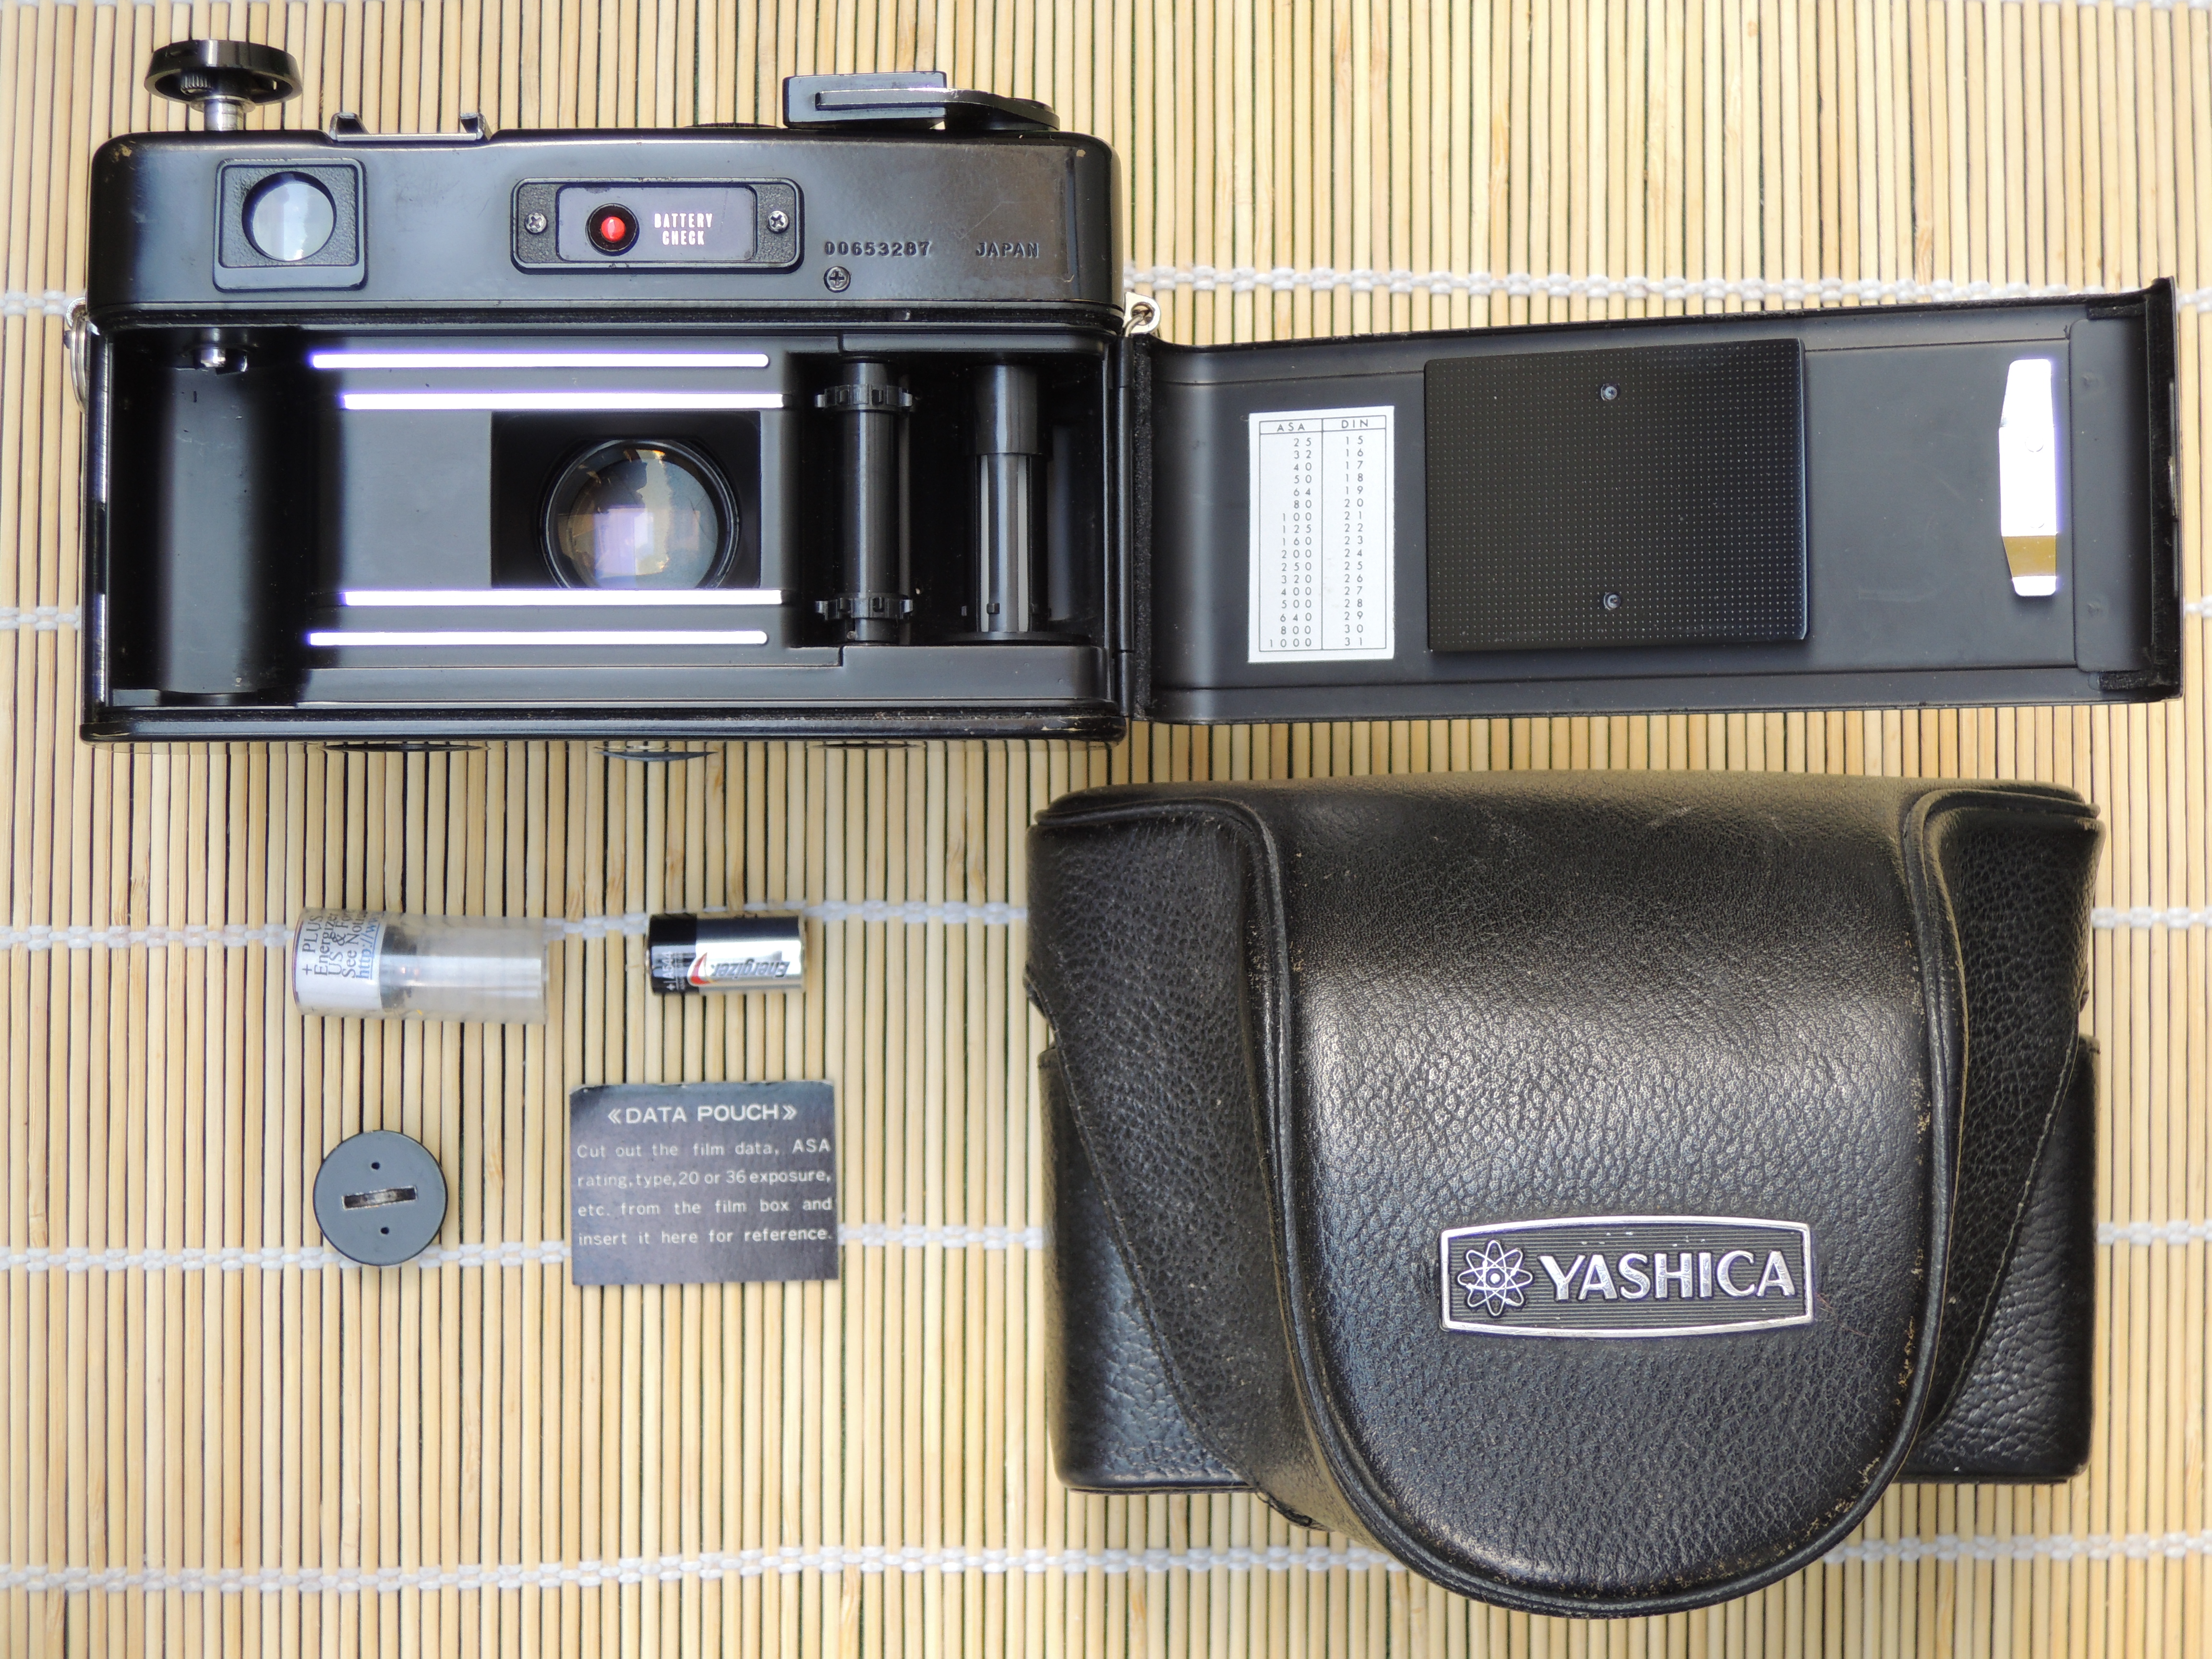 The Yashica Electro 35 GT – All my cameras